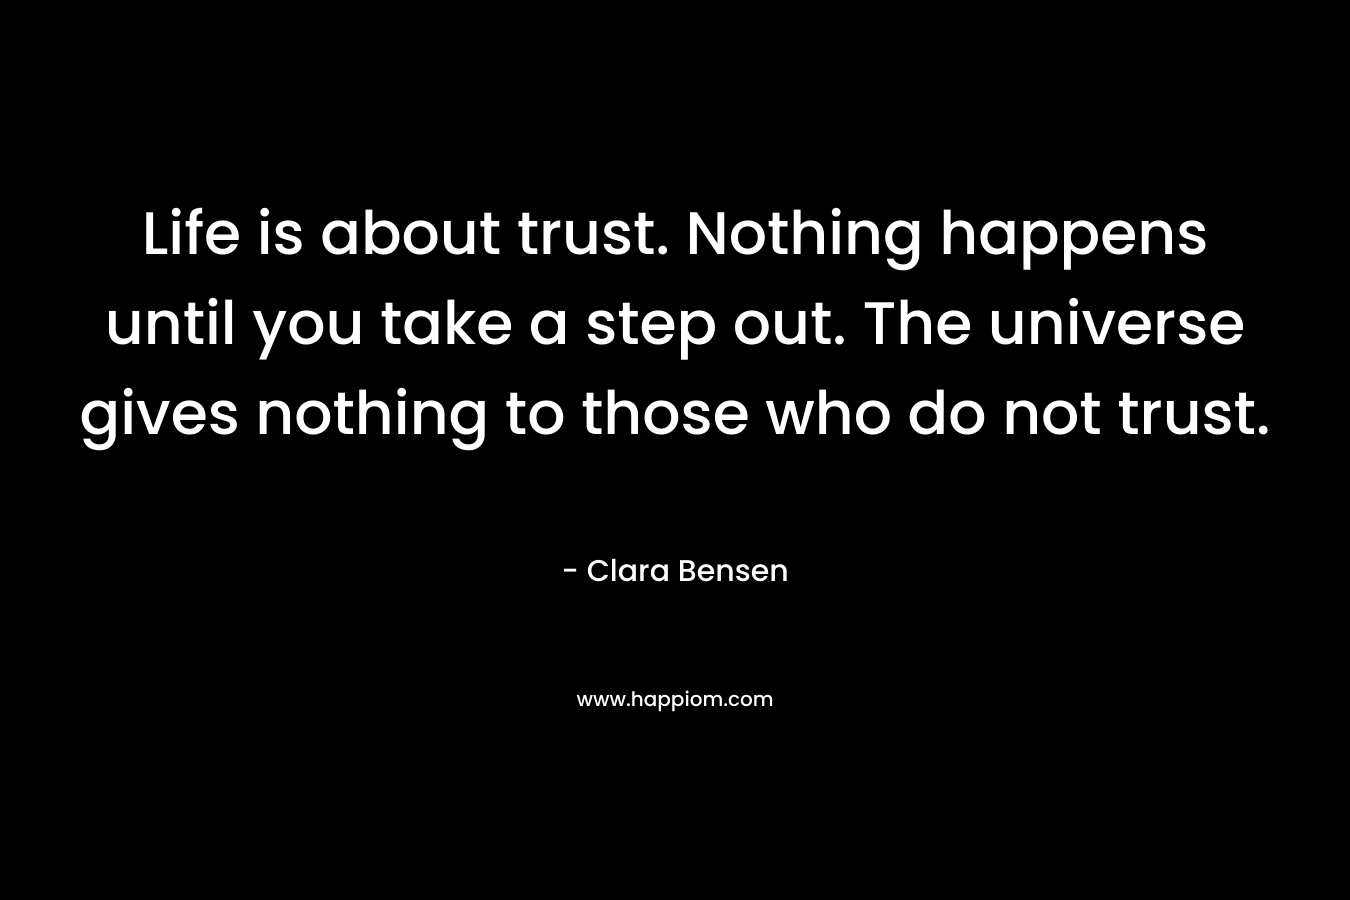 Life is about trust. Nothing happens until you take a step out. The universe gives nothing to those who do not trust.